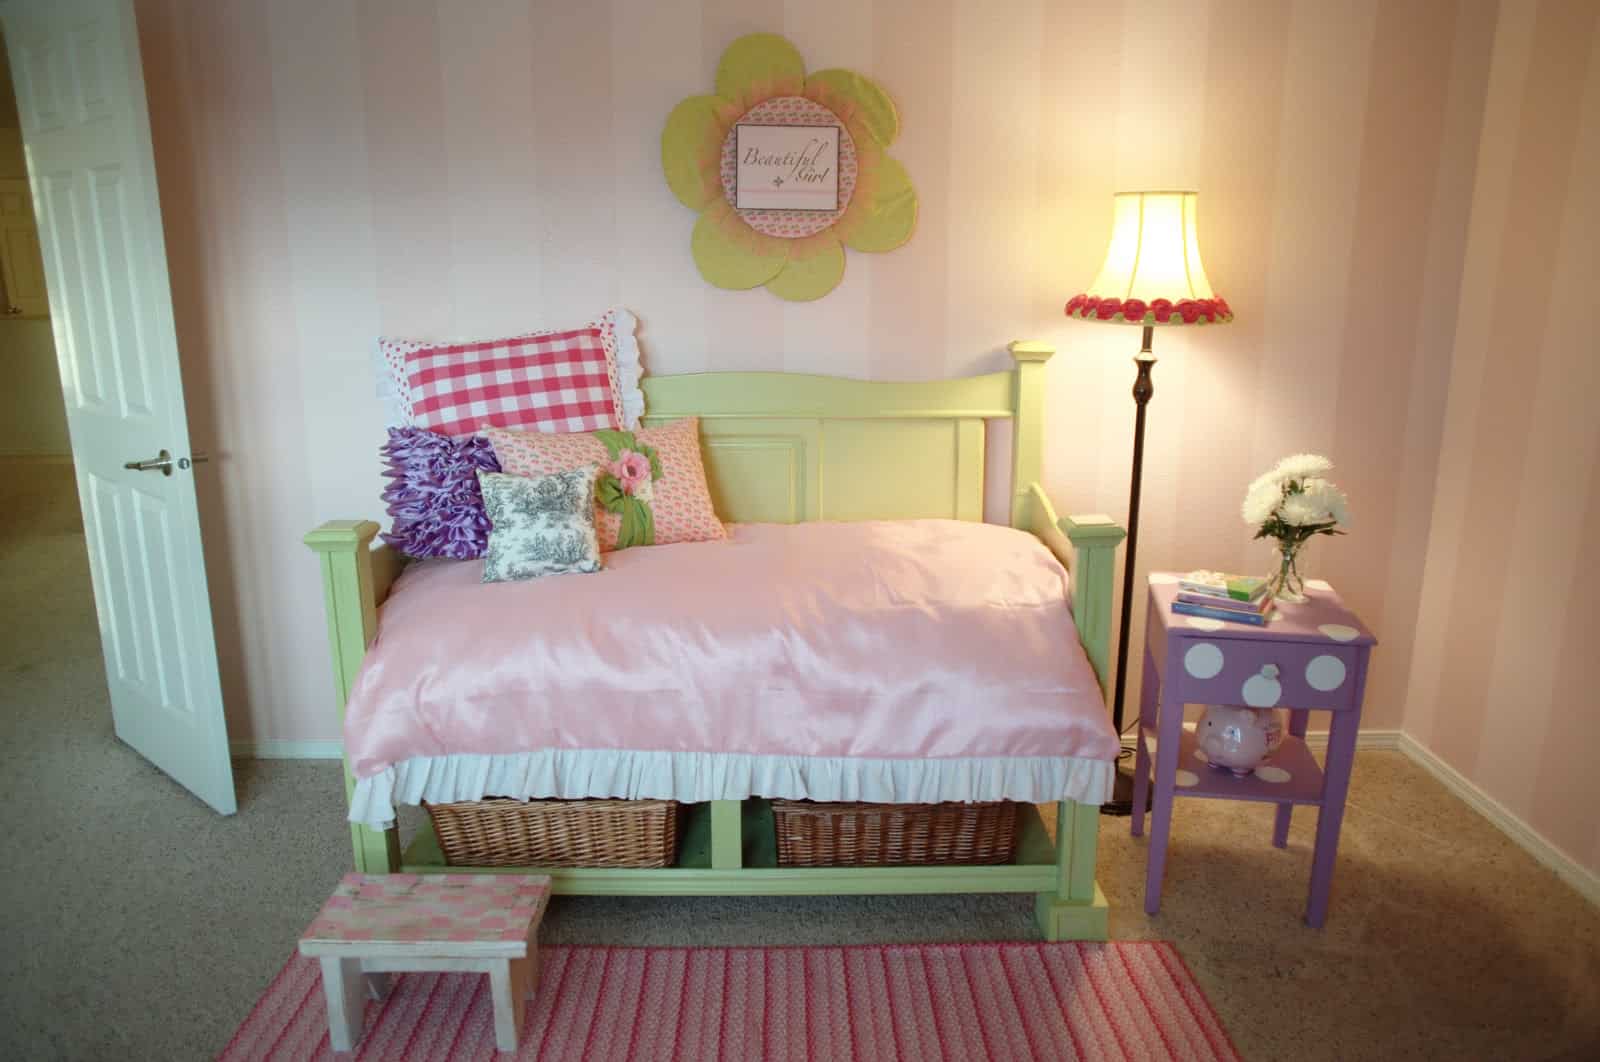 Toddler couch bed